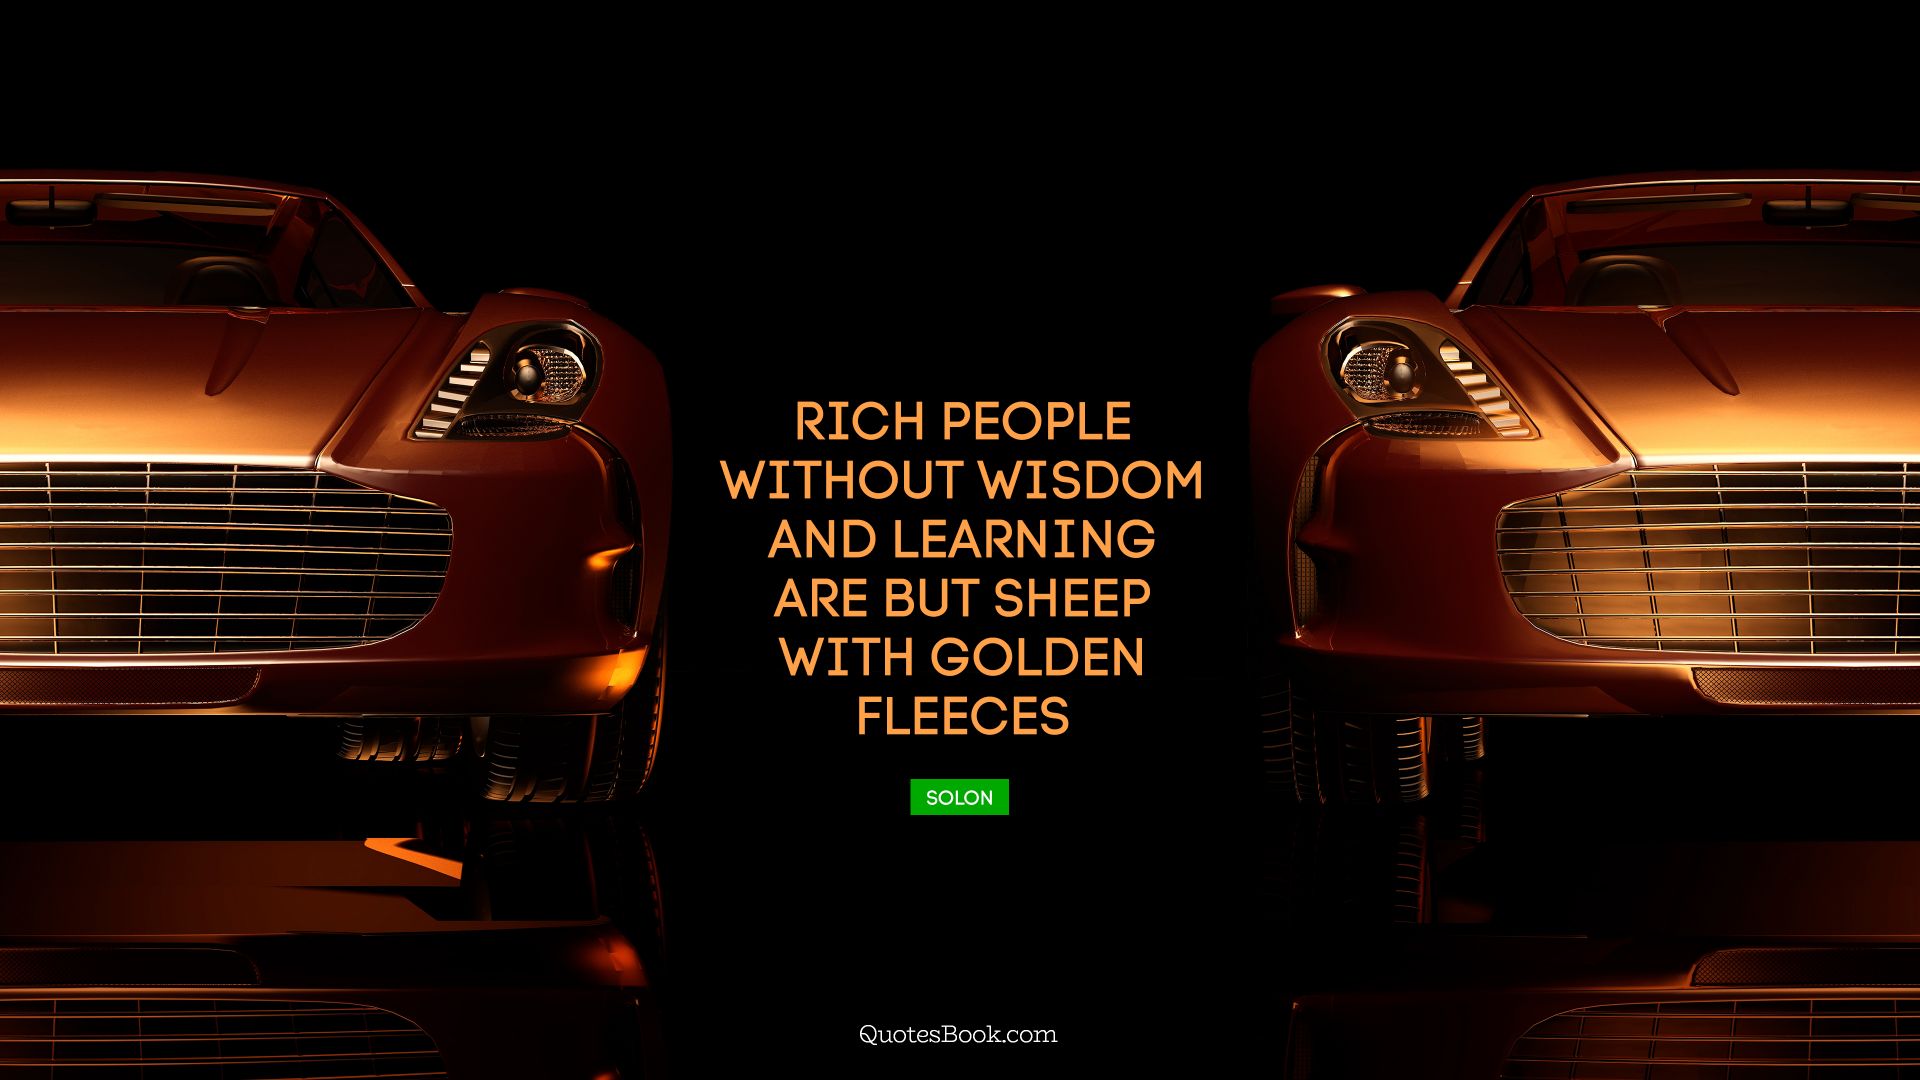 Rich people without wisdom and learning are but sheep with golden fleeces. - Quote by Solon